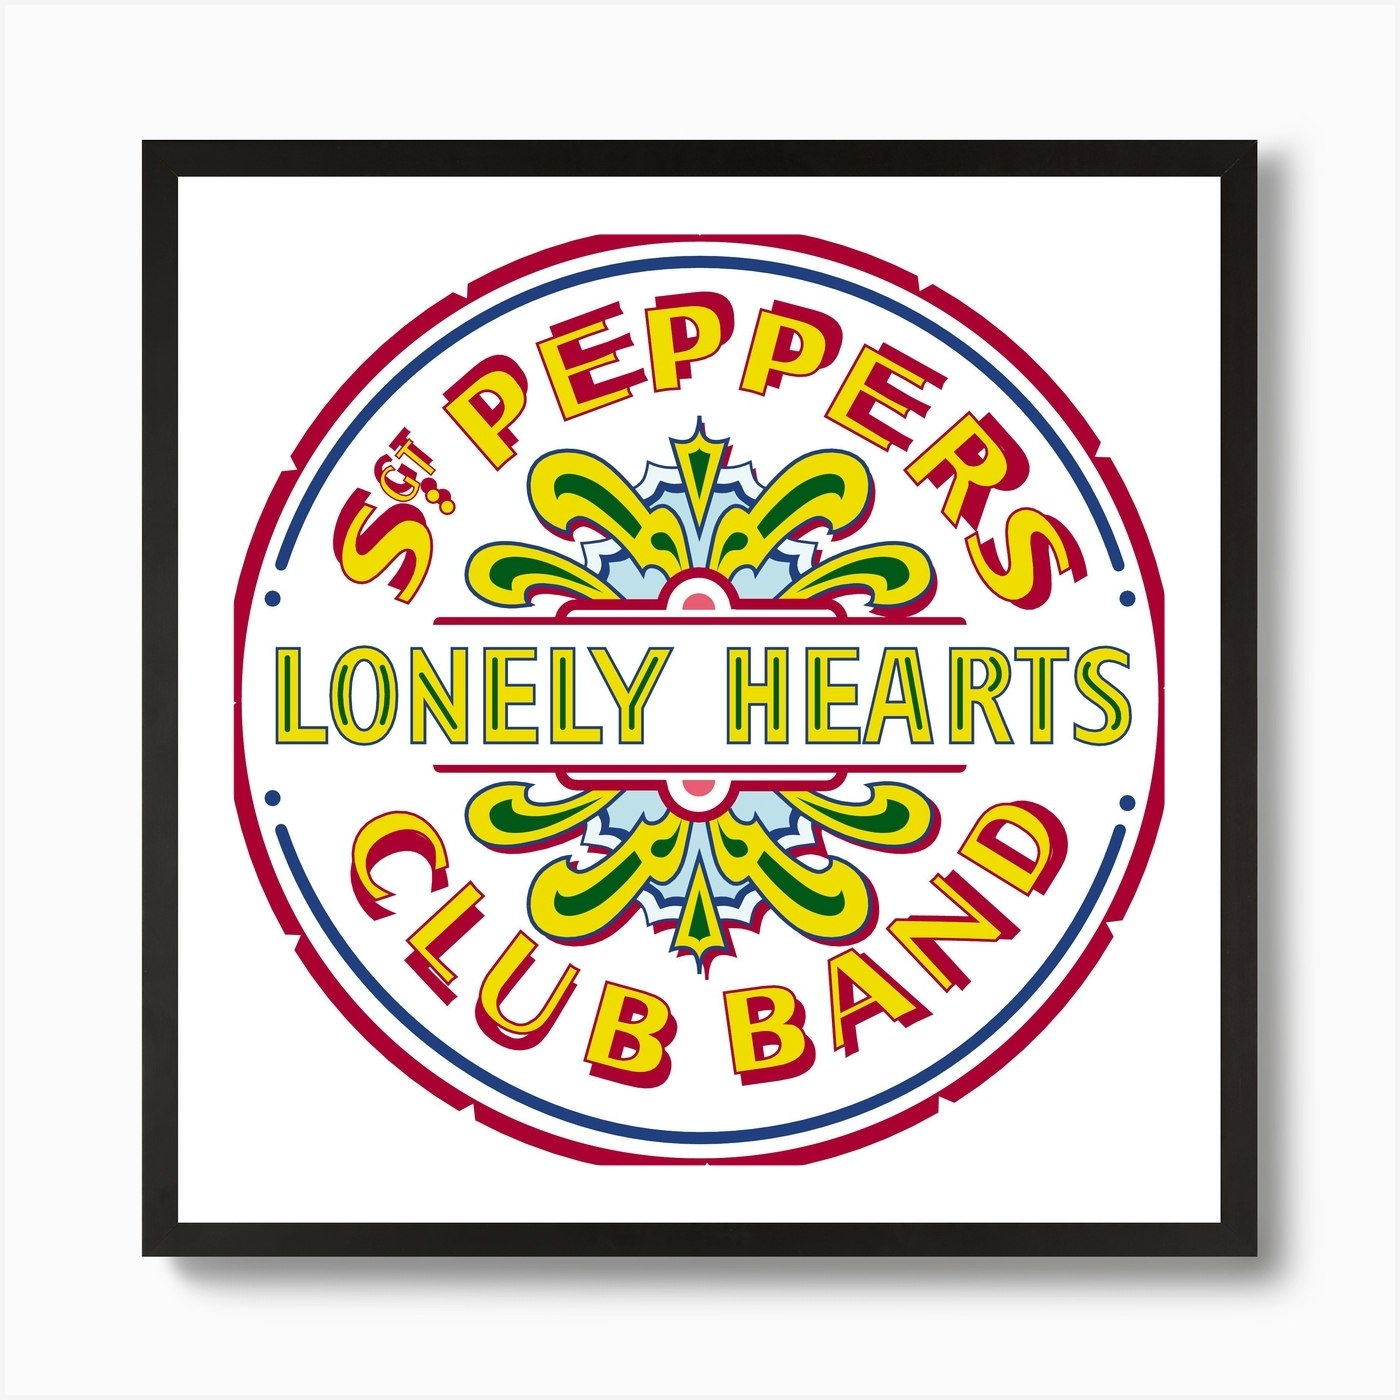 Sgt Pepper's Lonely Hearts Club Band Drum Logo, The Beatles Collection Art  Print by The Beatles Art Prints Collection - Fy